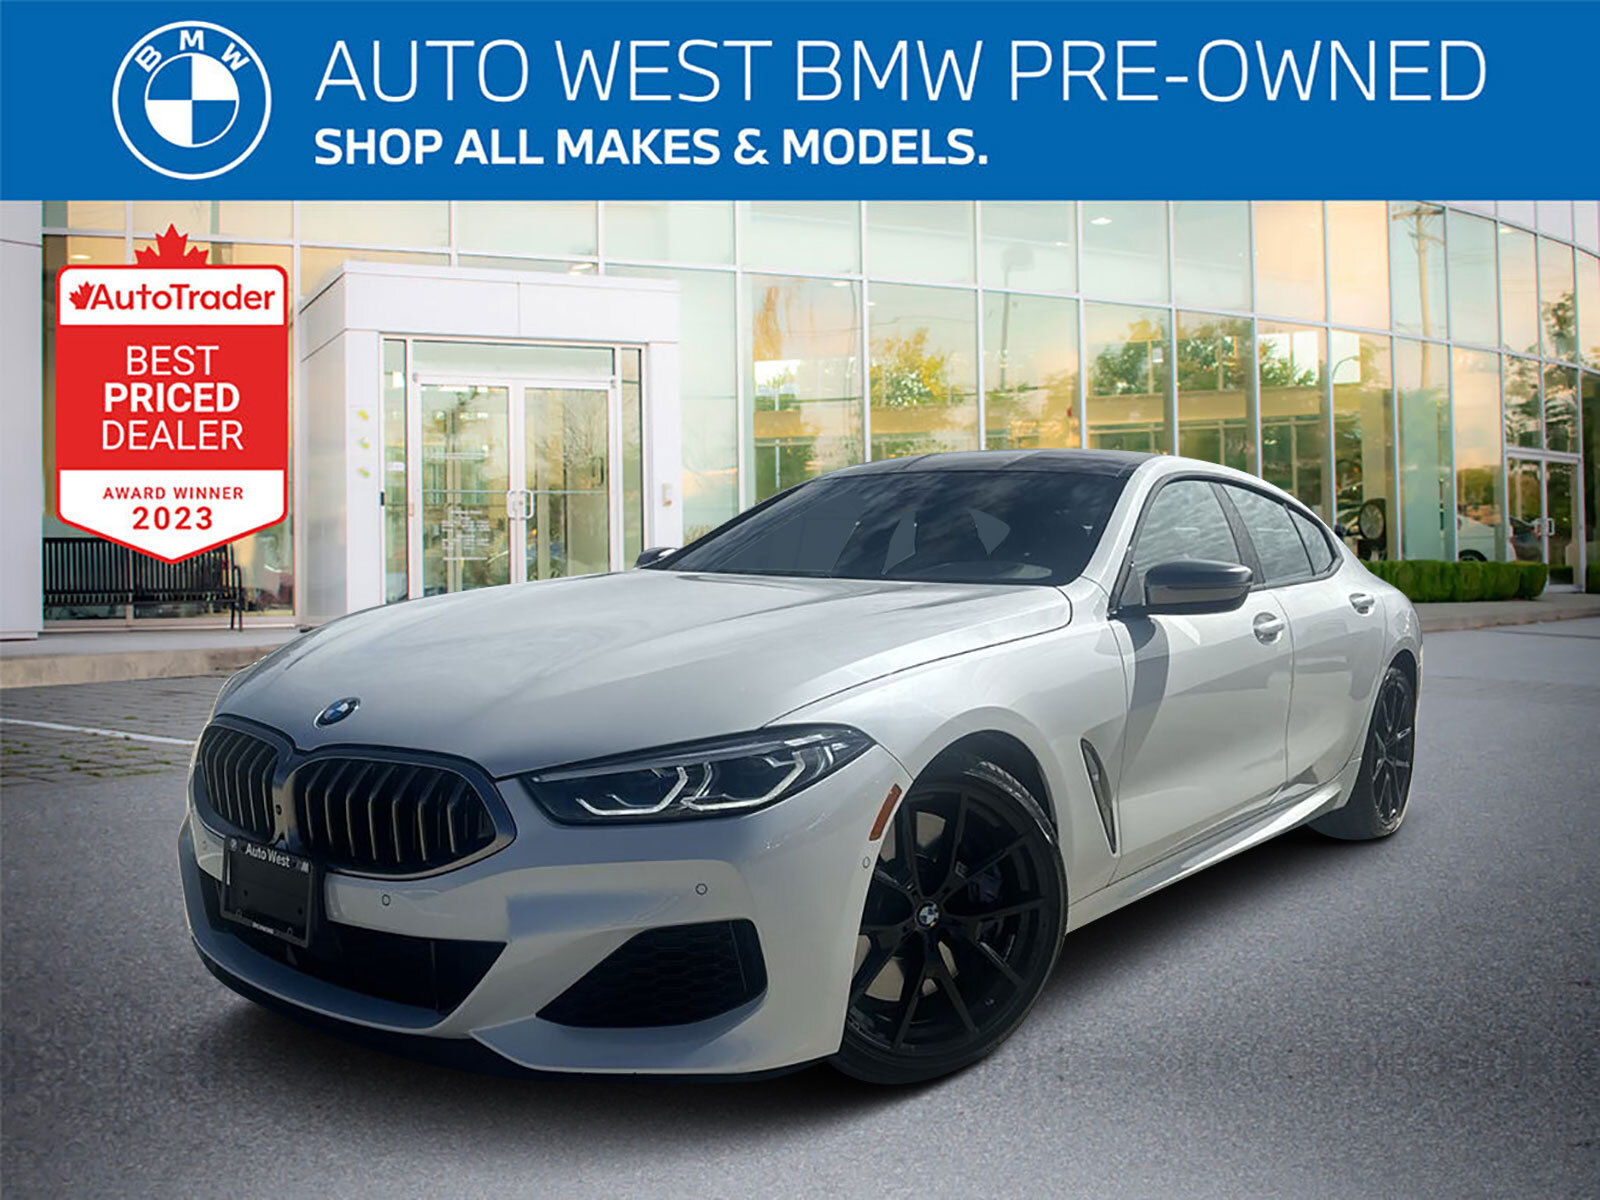 2020 BMW 8 Series M850i xDrive GC | LowKM | Carbon roof and trim